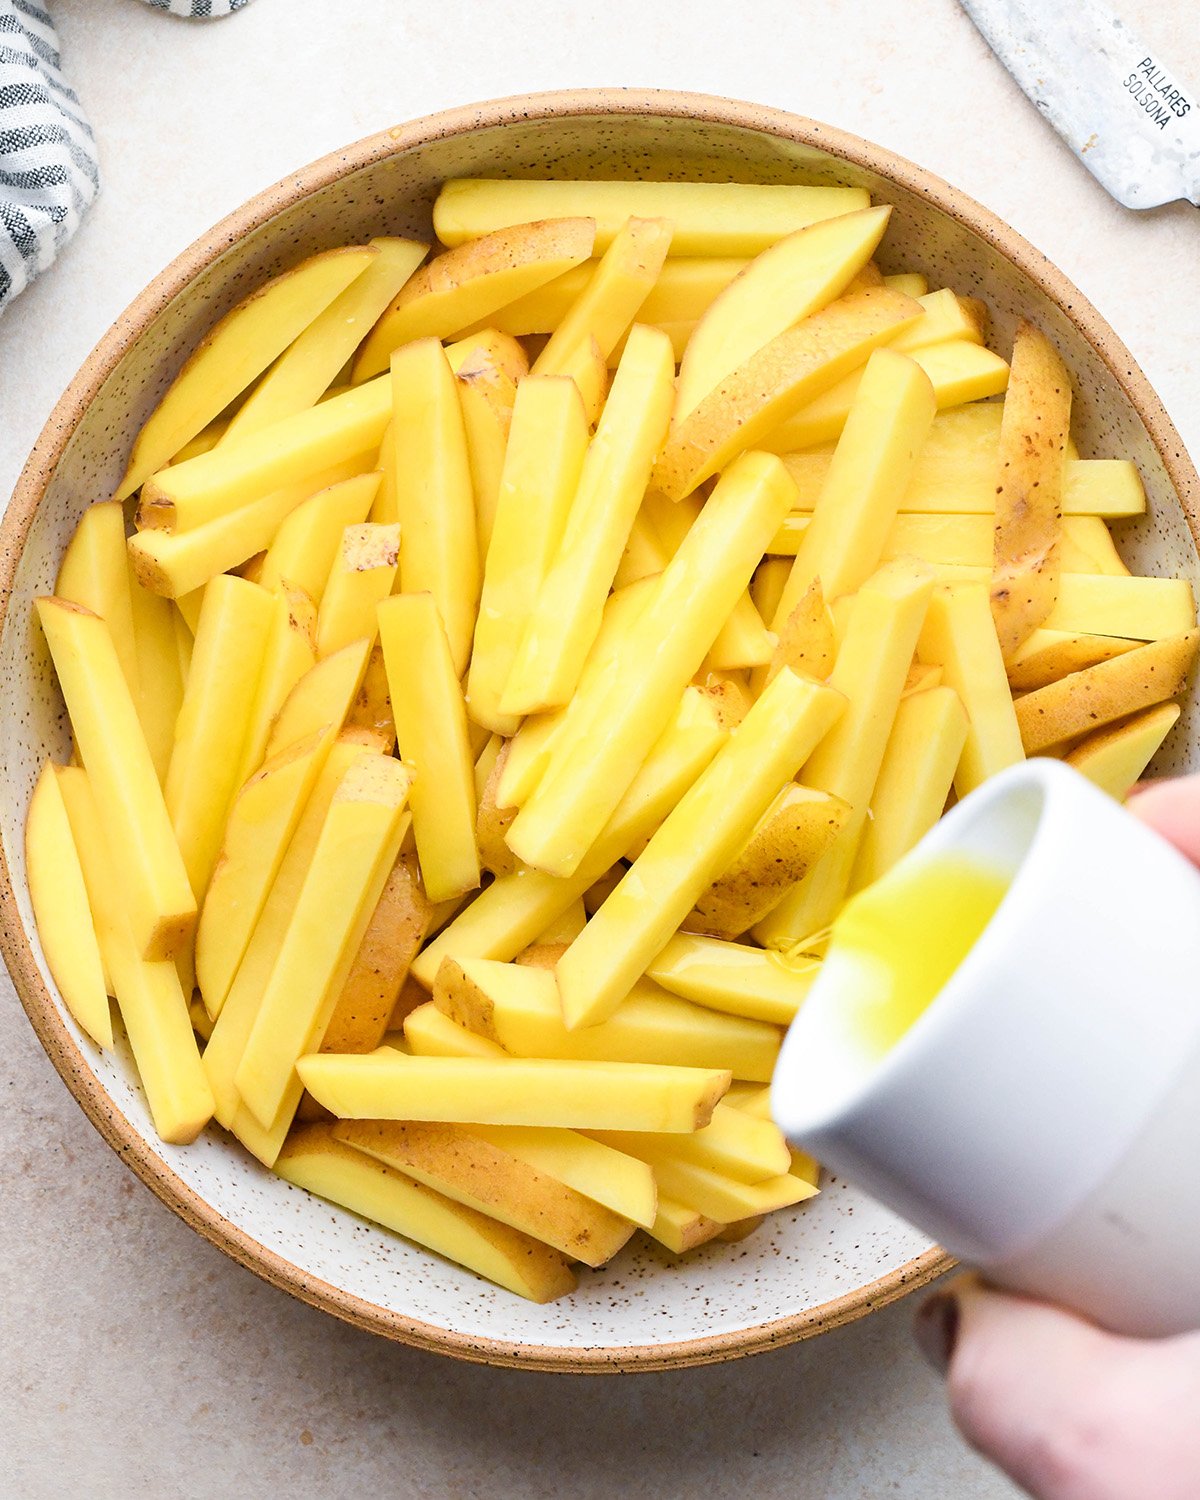 How to Make Homemade French Fries - pouring olive oil over potatoes